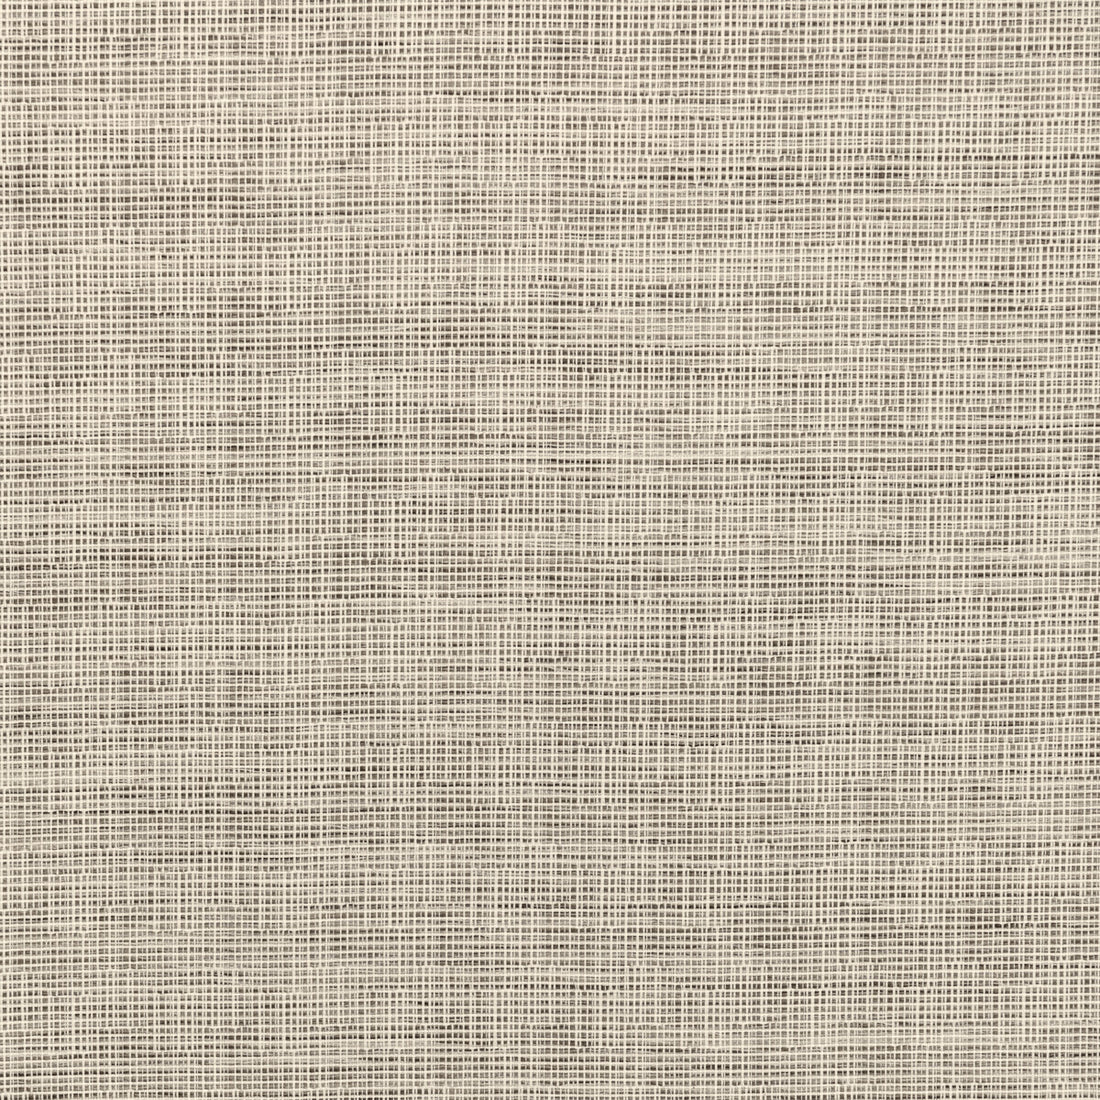 Kravet Smart fabric in 36303-11 color - pattern 36303.11.0 - by Kravet Smart in the Performance Crypton Home collection